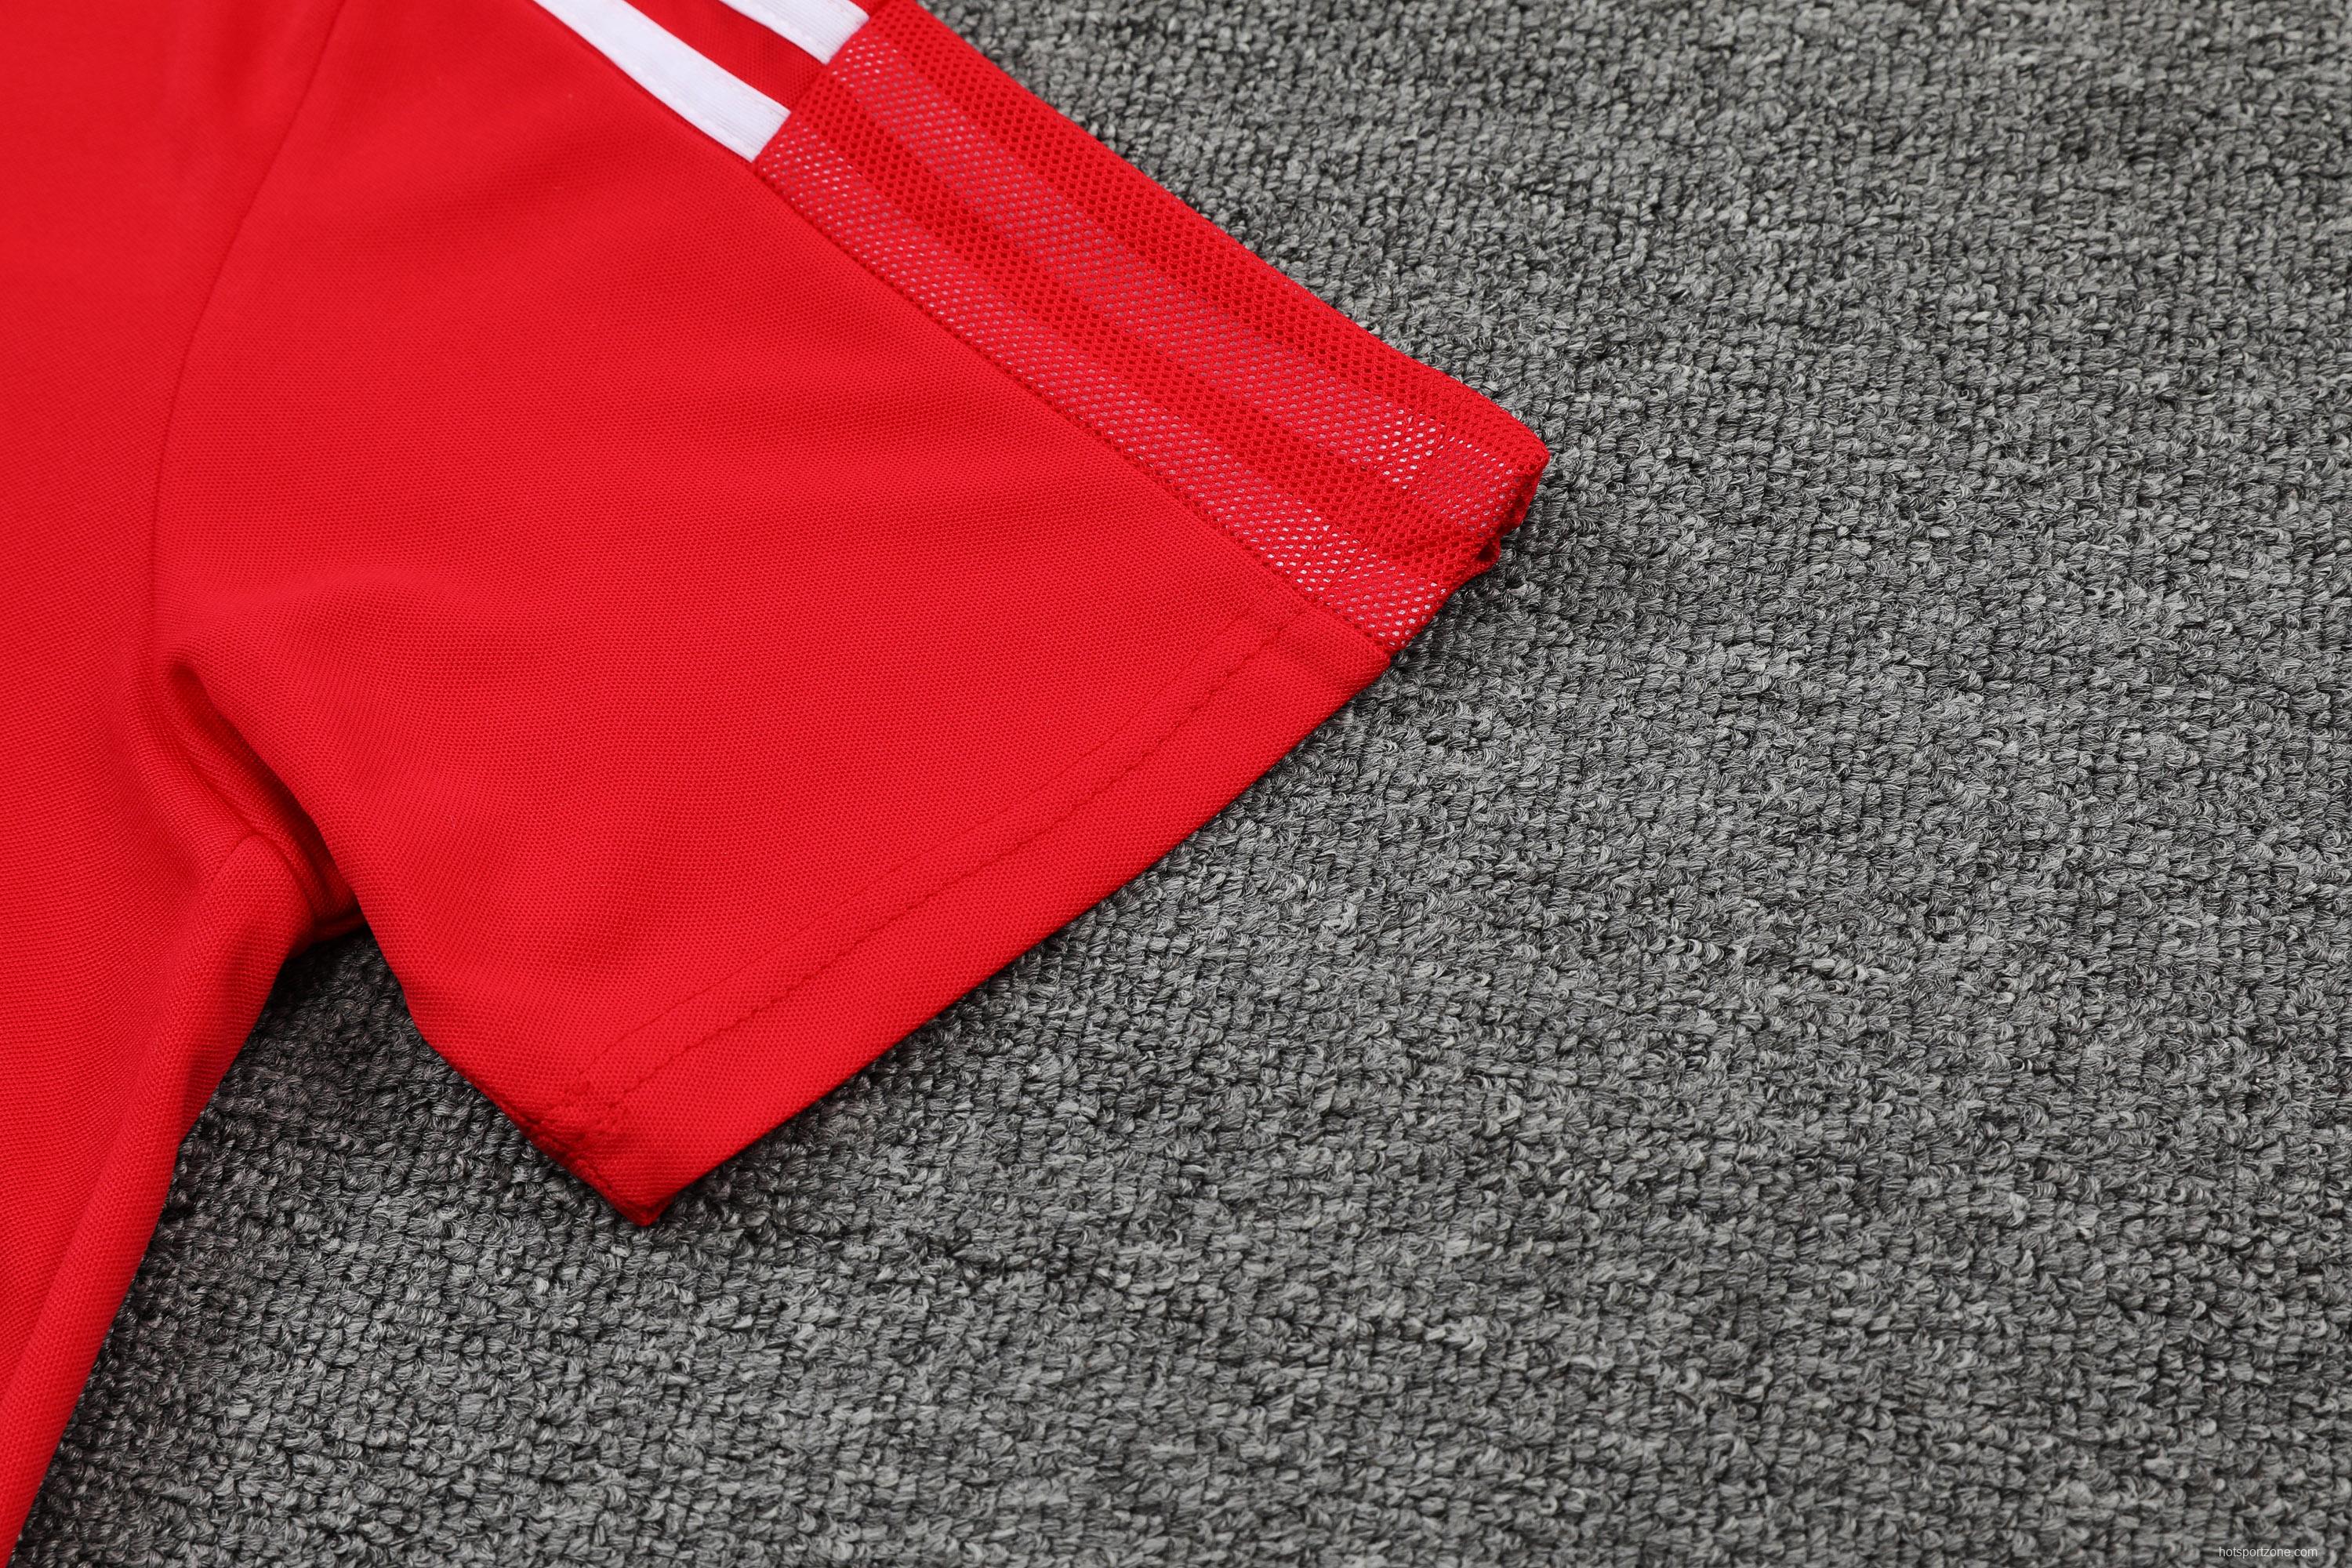 Bayern Munich POLO kit red (not sold separately)